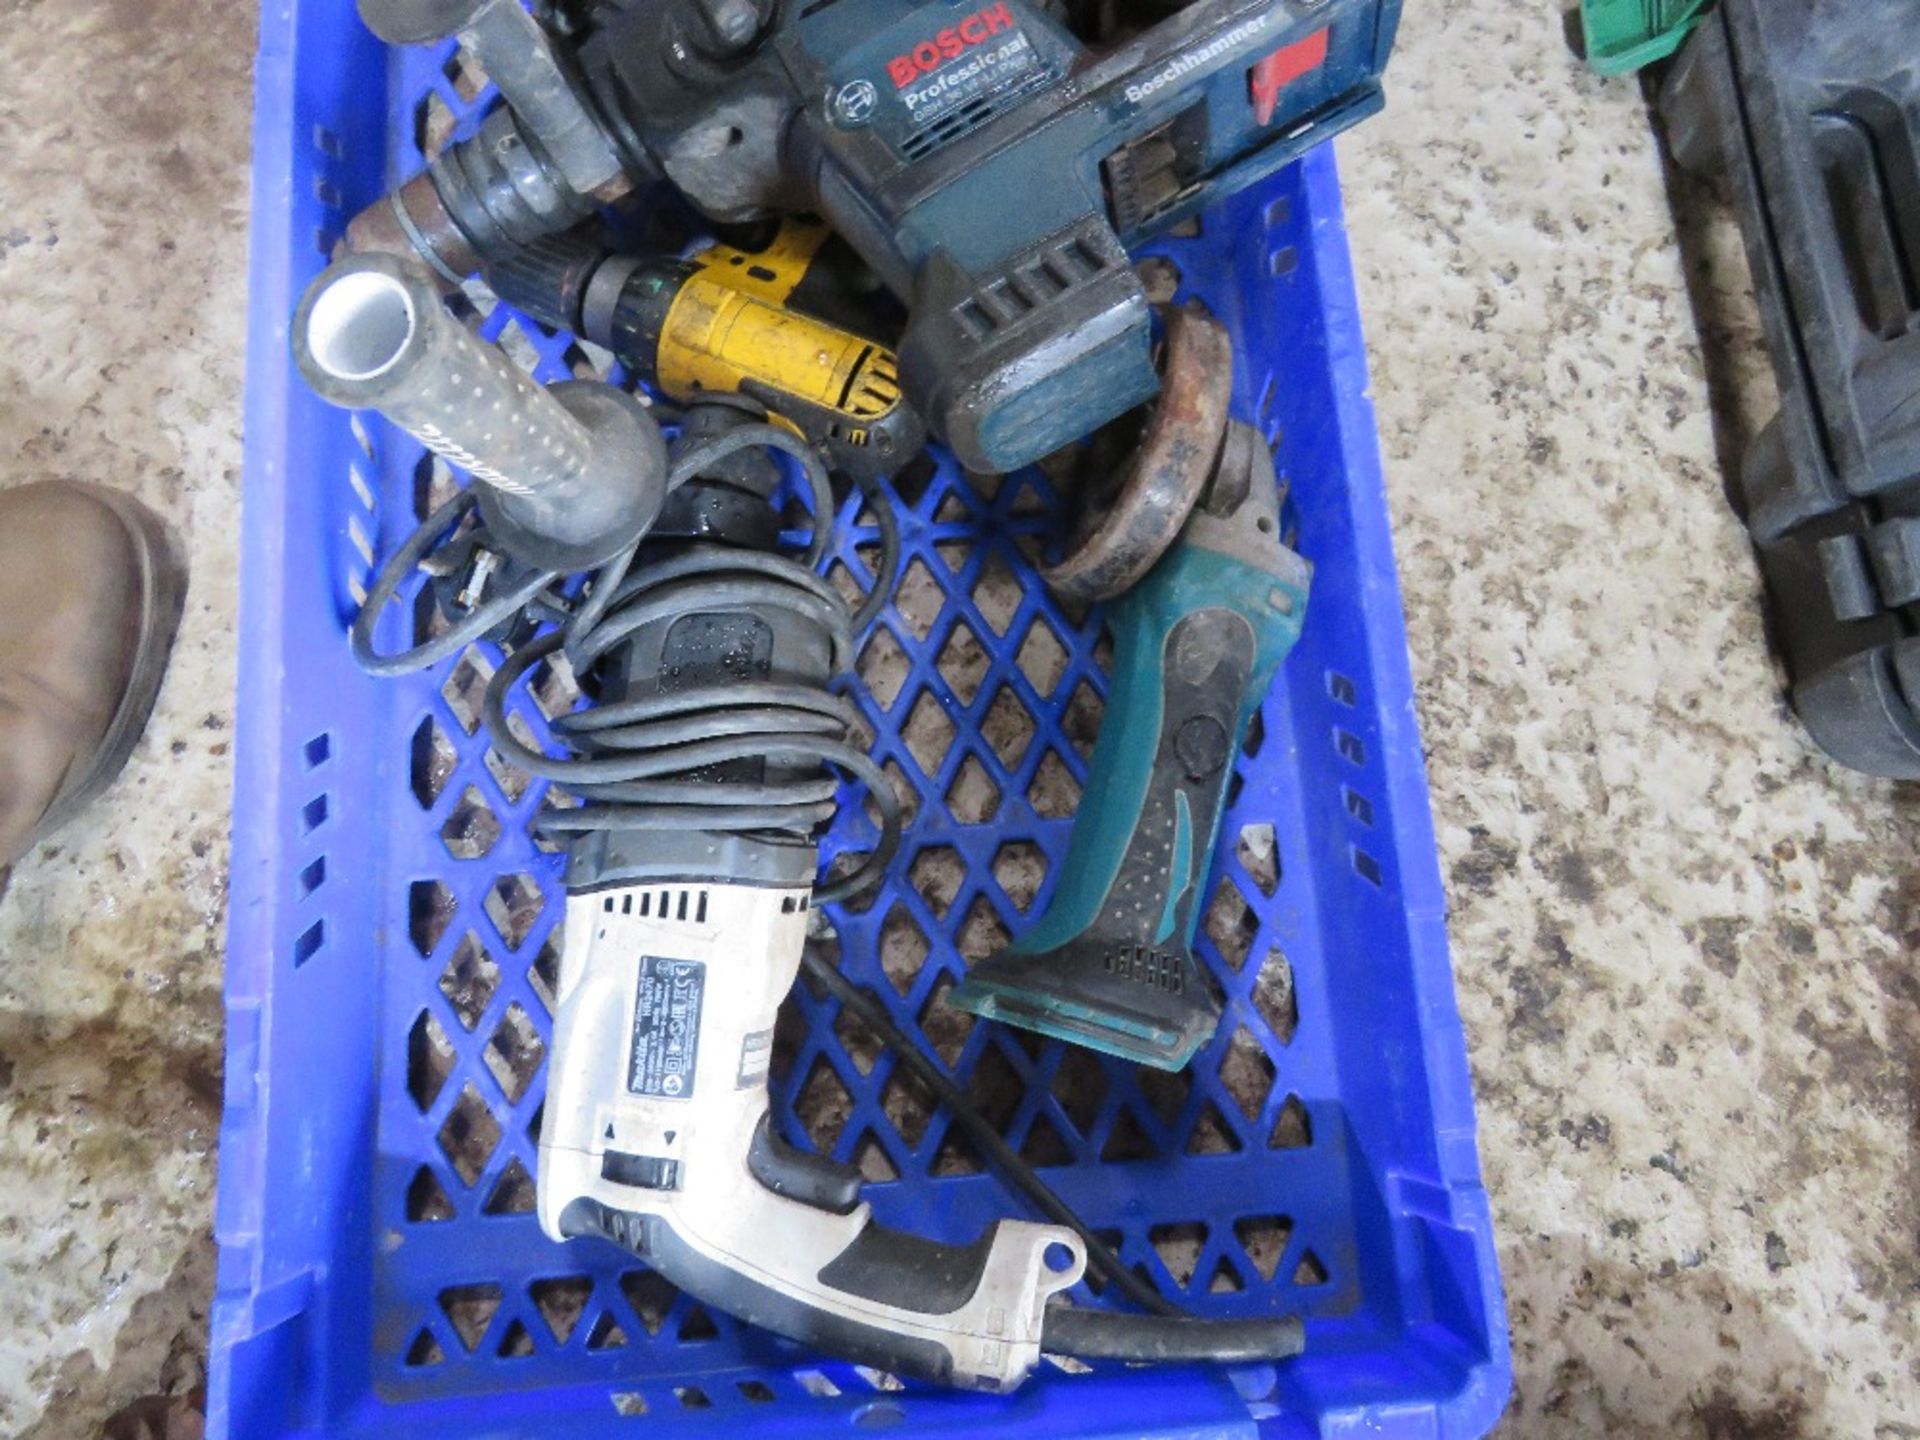 6NO DRILLS/POWER TOOLS AS SHOWN. - Image 4 of 7